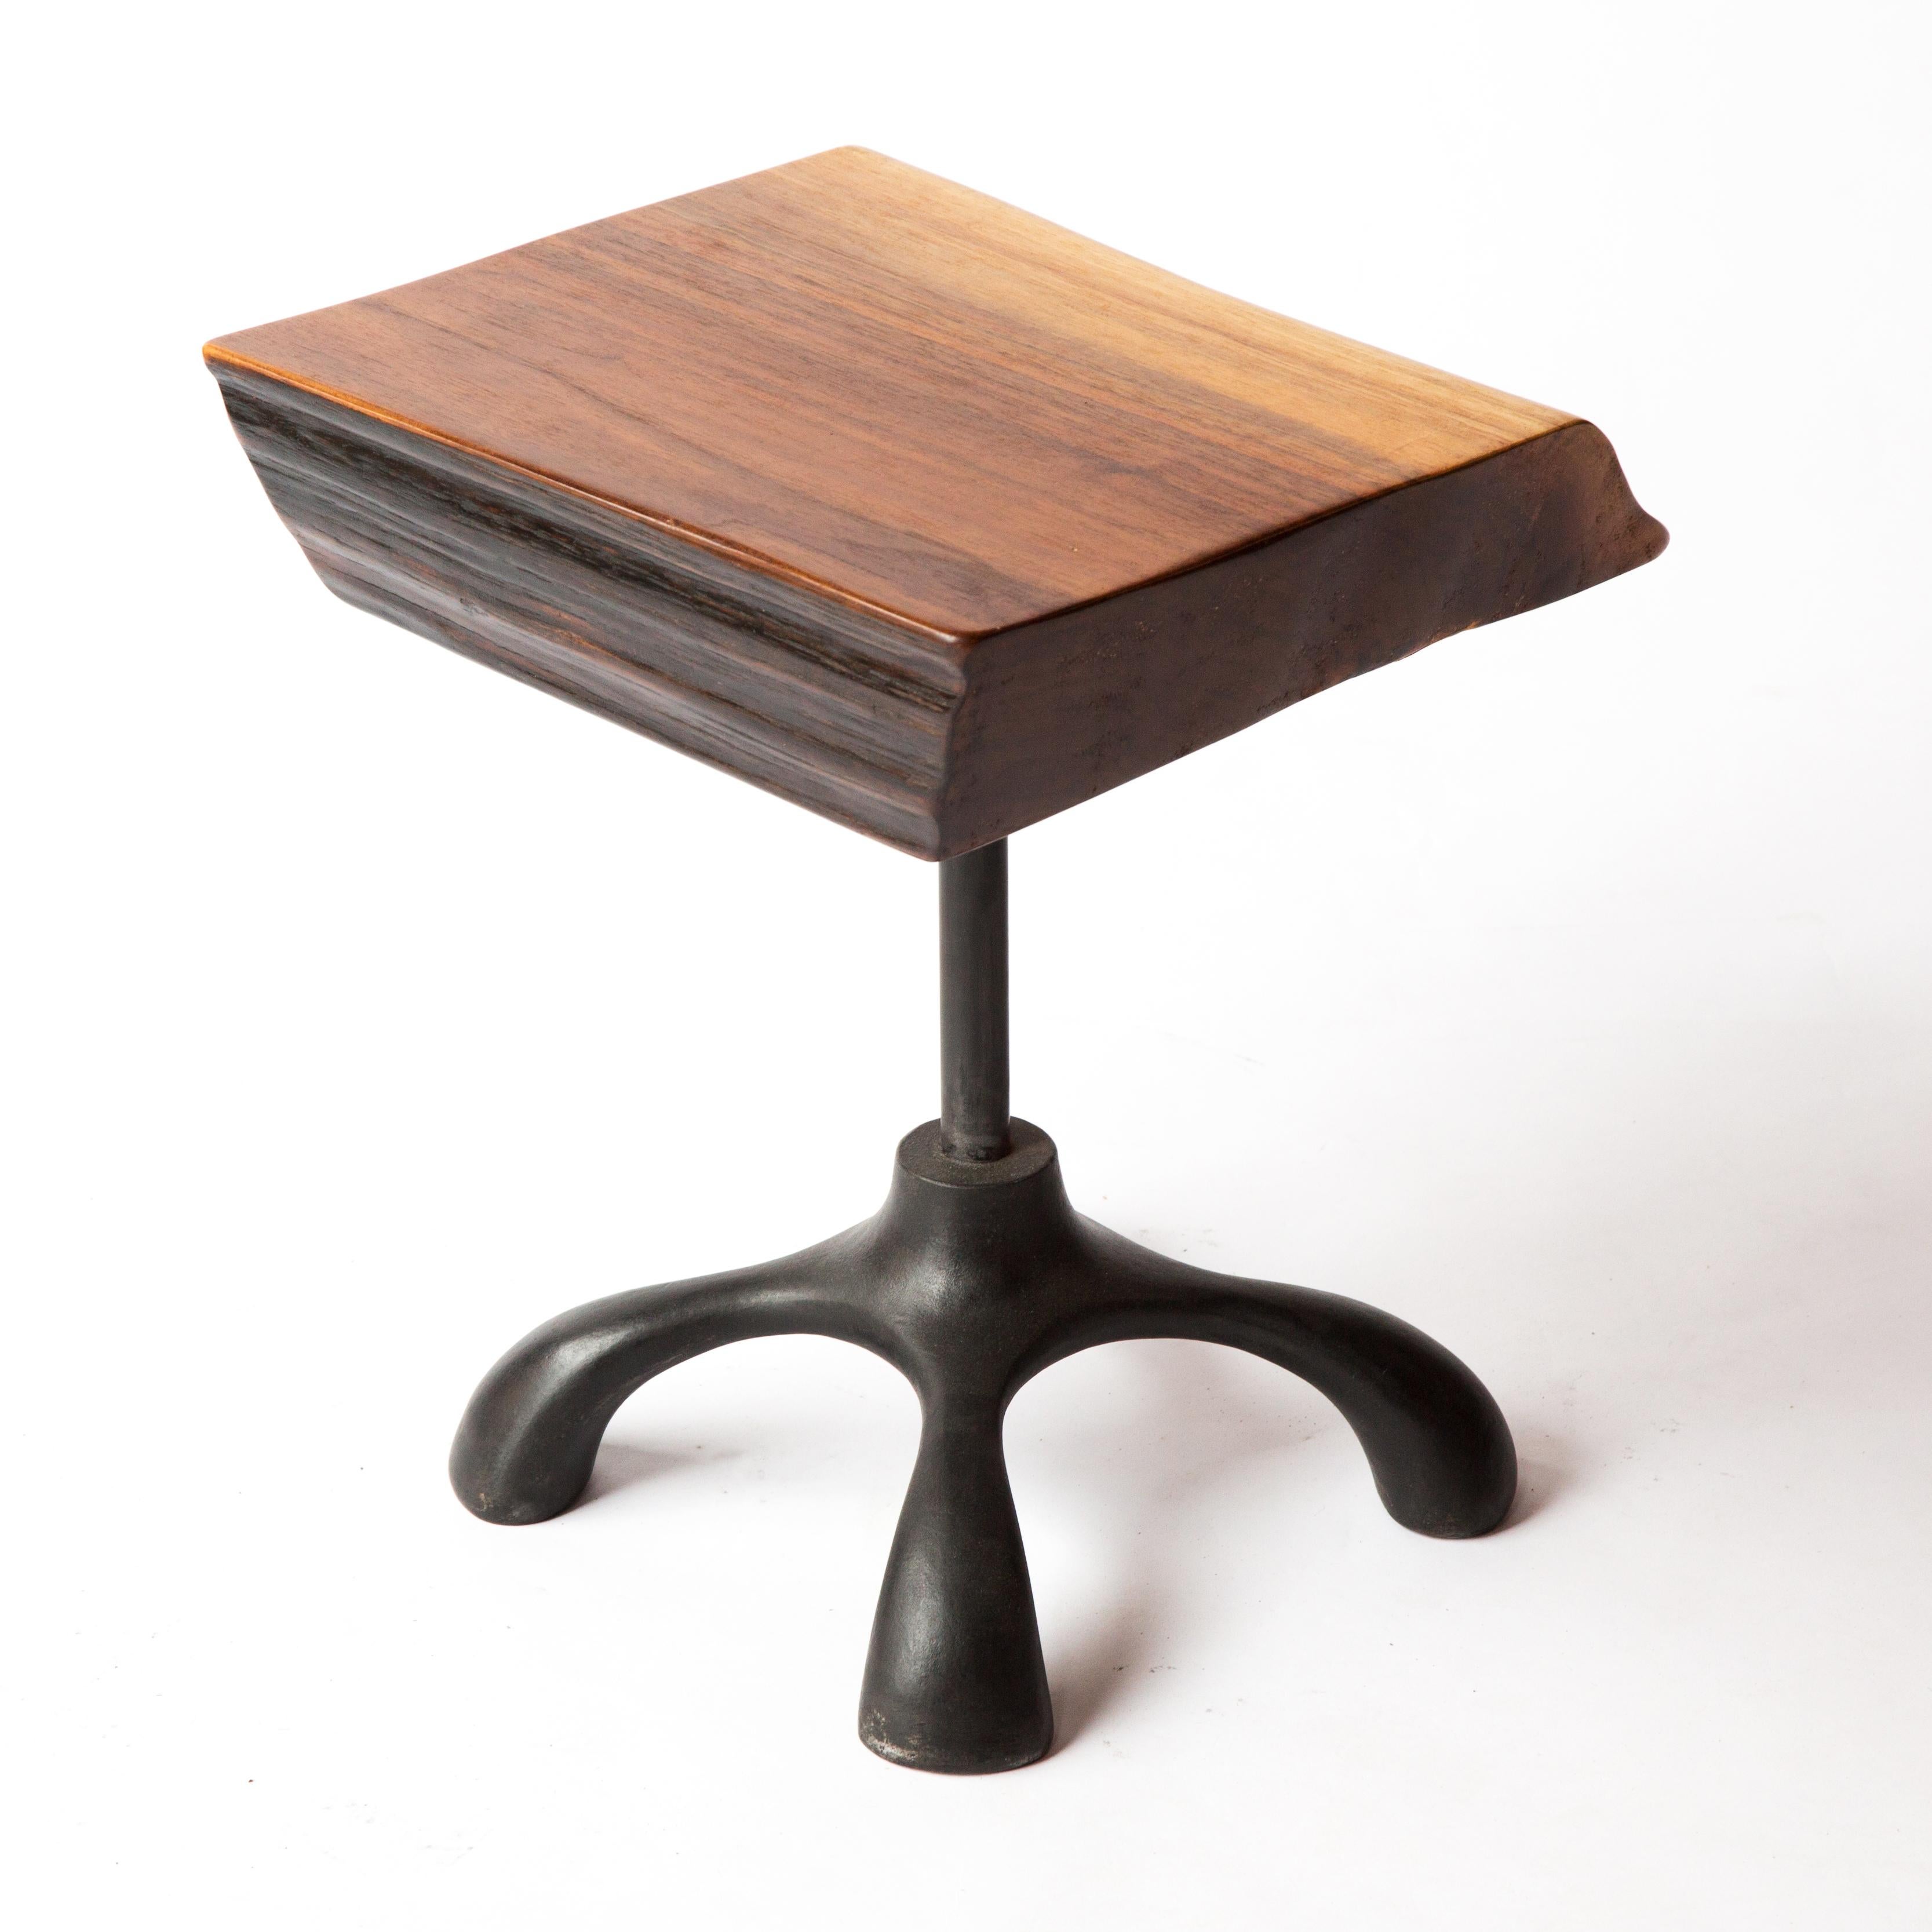 Walnut Slab Side Table, Cast Aluminum Base, Hand Carved Jordan Mozer, USA, 2017 In New Condition For Sale In Chicago, IL